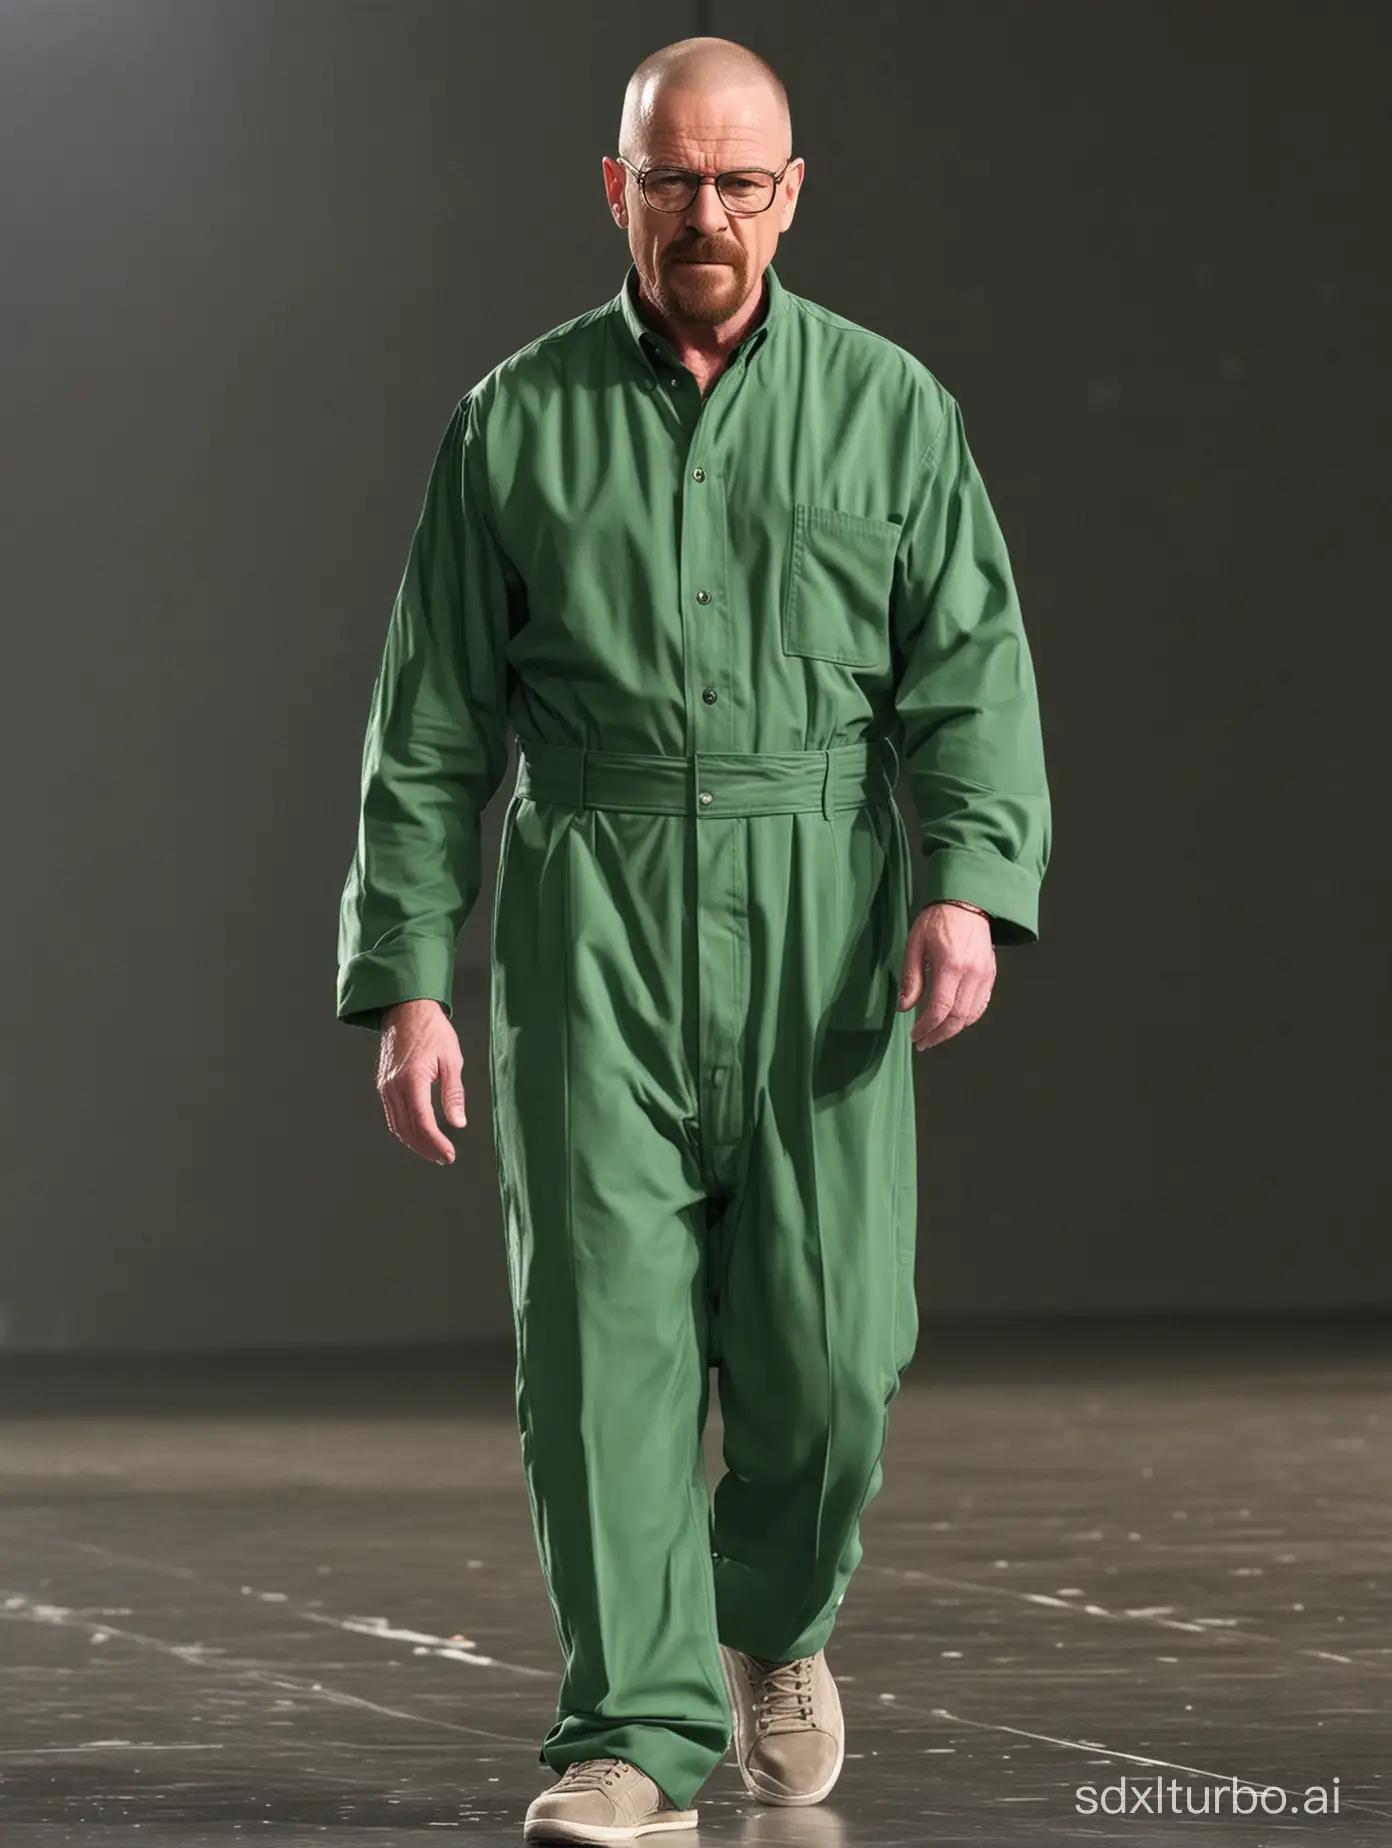 Walter-White-Breaking-Bad-Green-Outfit-Fashion-Show-Runway-Stroll